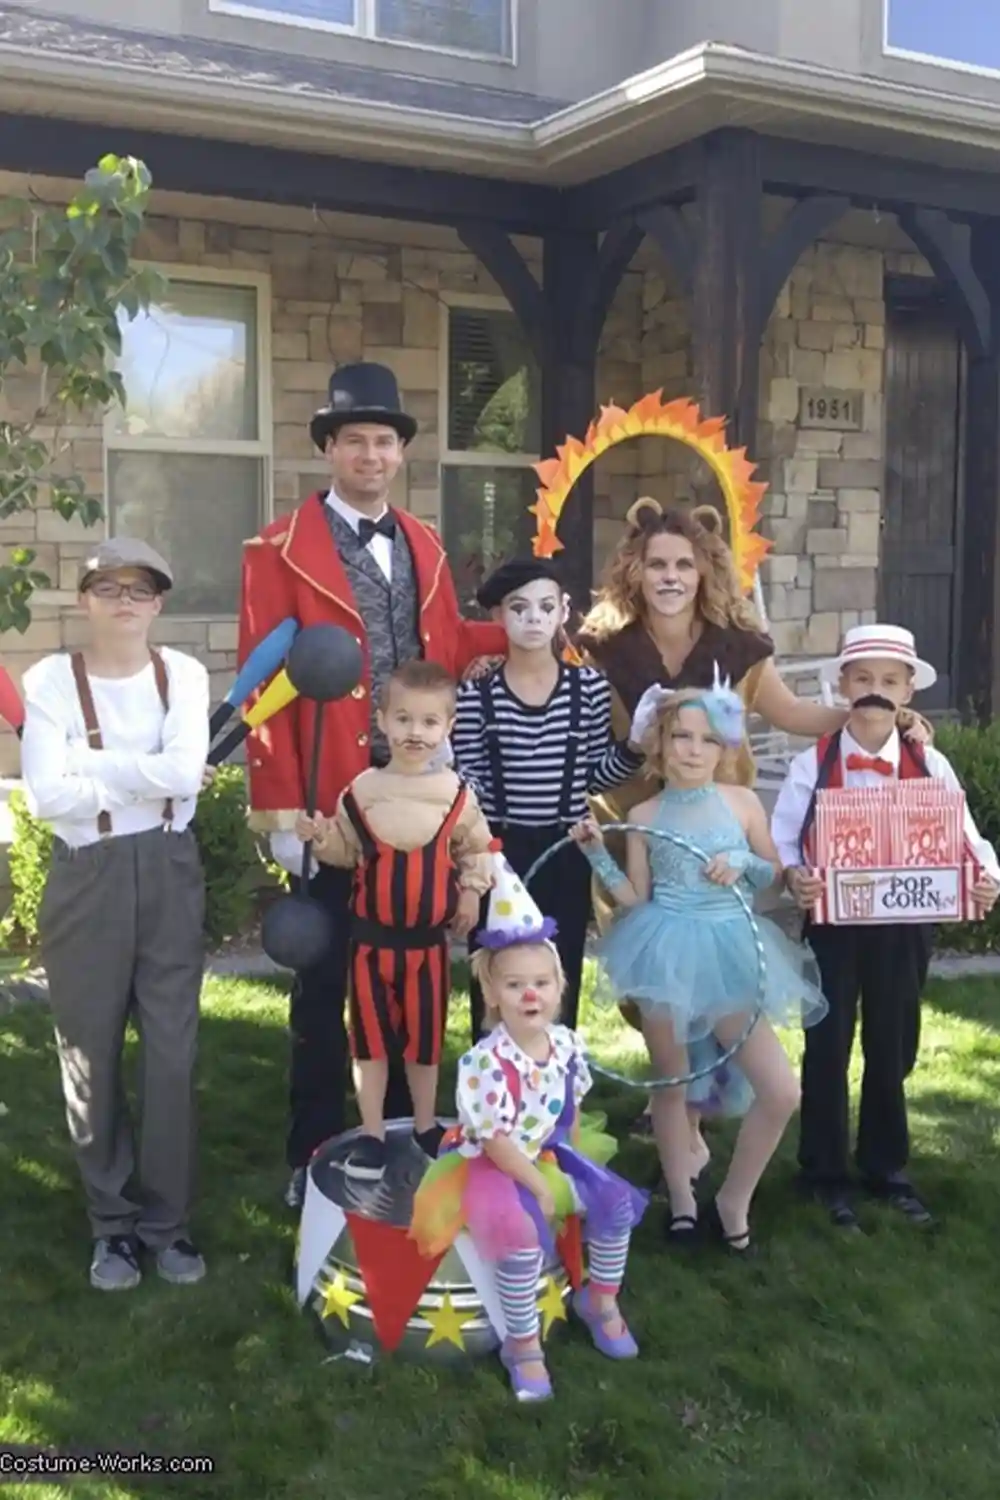 Carnival Party Ideas - Circus Costumes from Costume Works